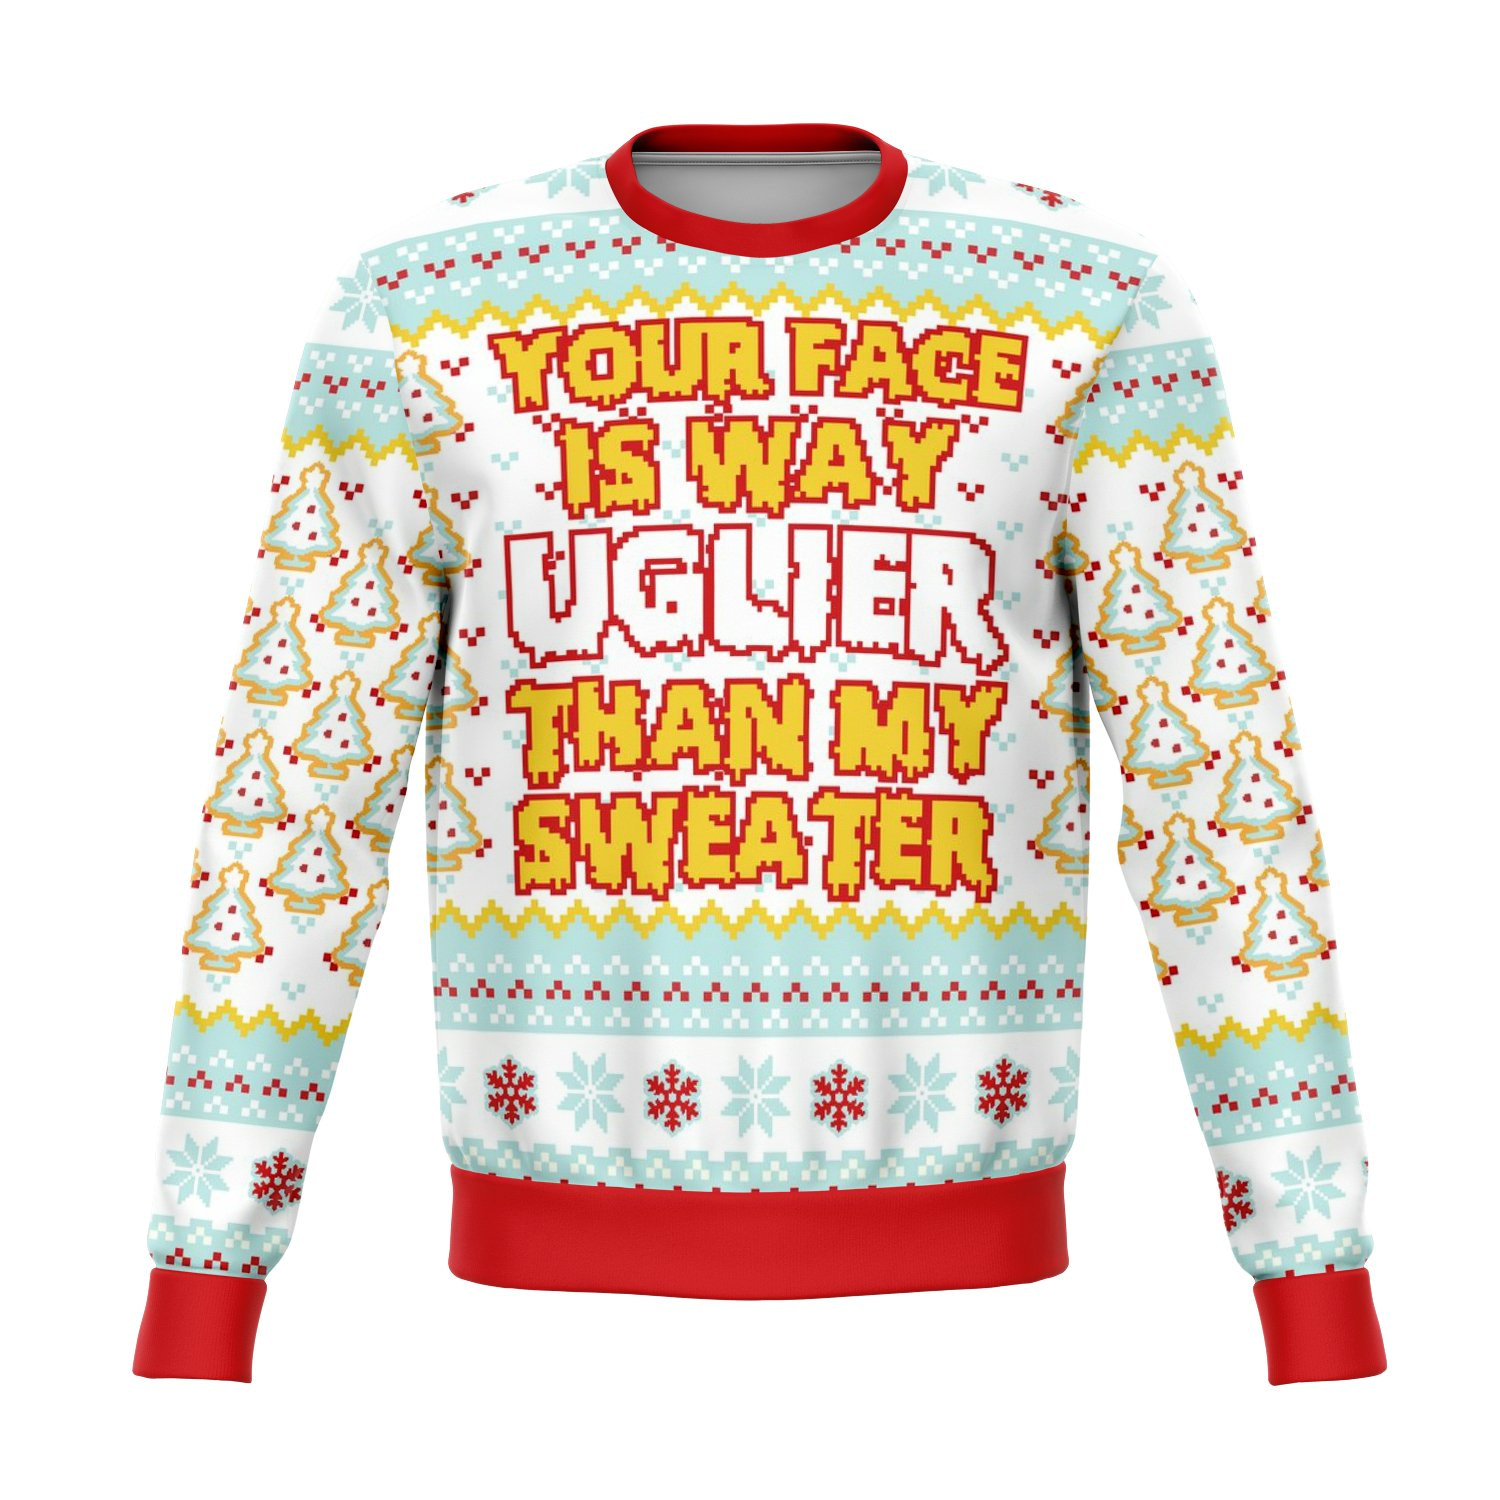 Your Face Is Uglier Than My Funny Ugly Sweater